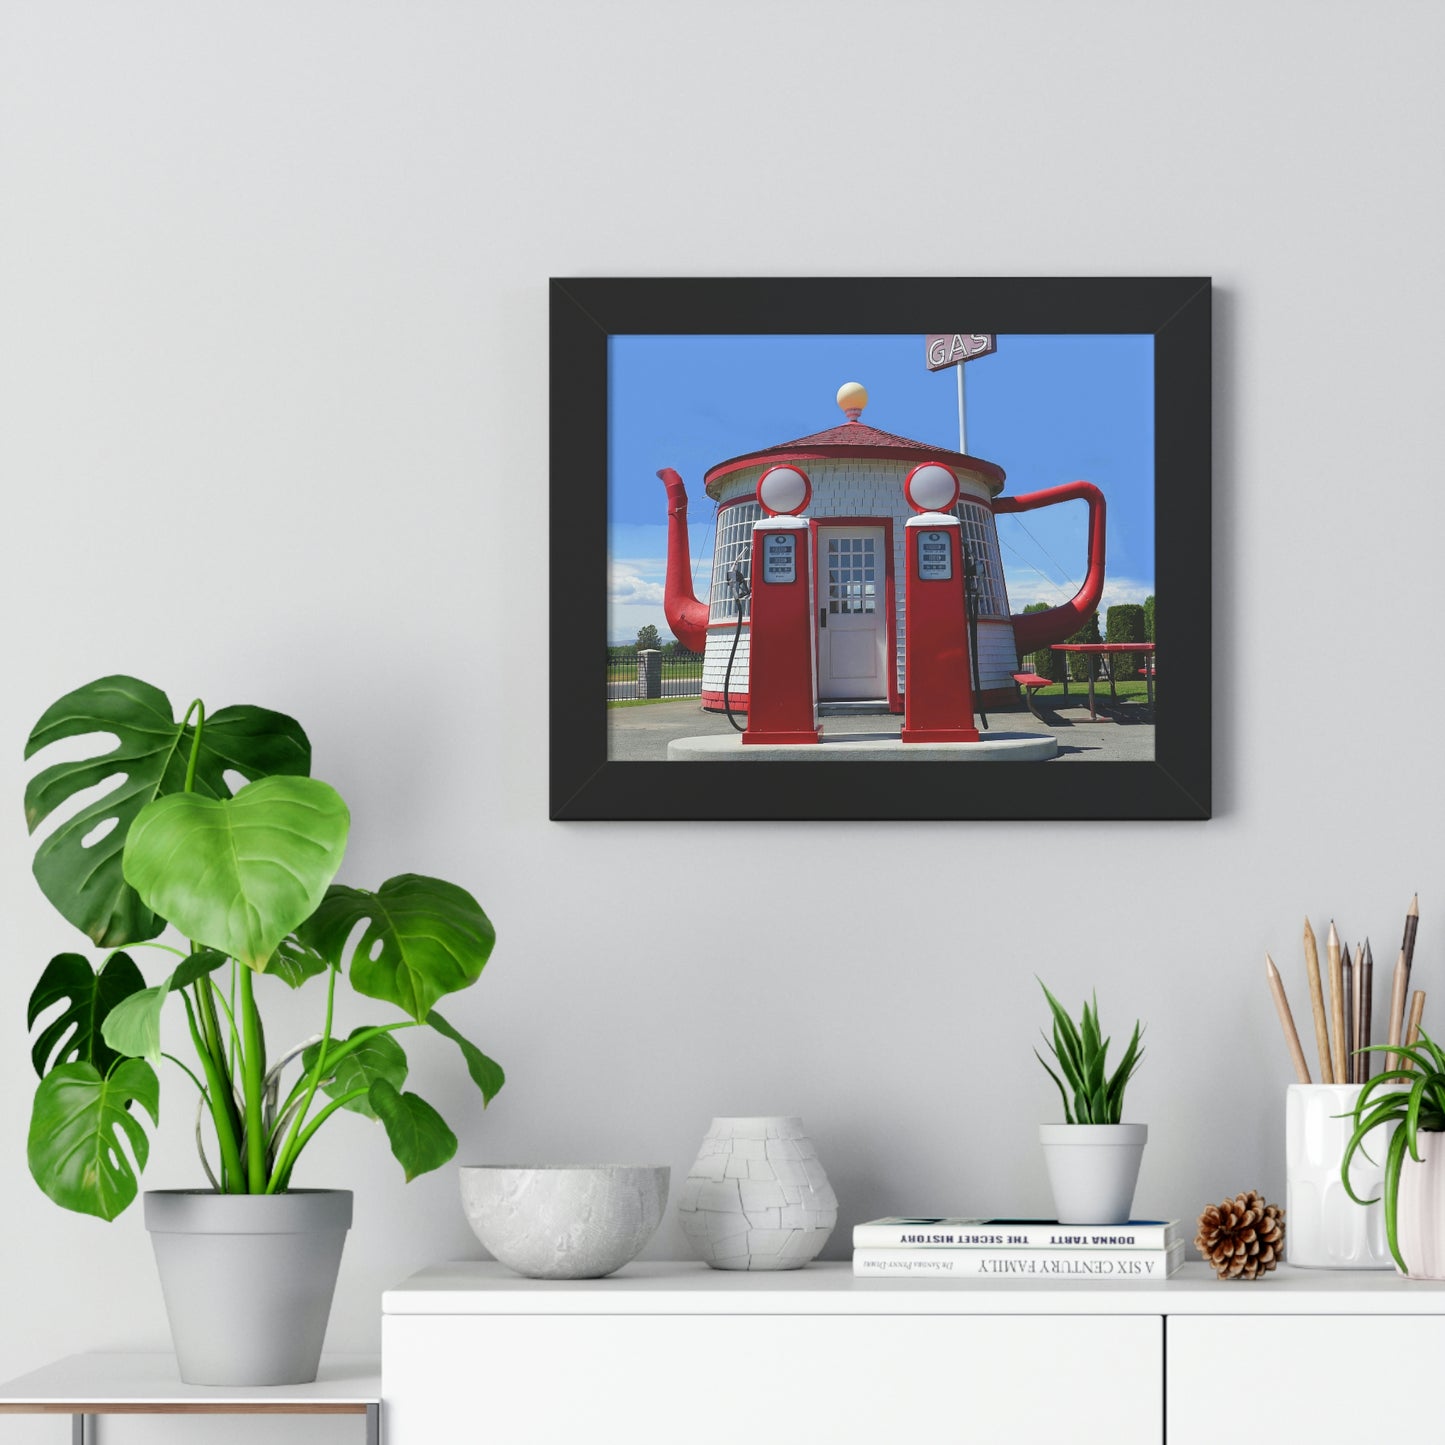 Awesome Teapot Dome Service Station - Framed Horizontal Poster - Fry1Productions